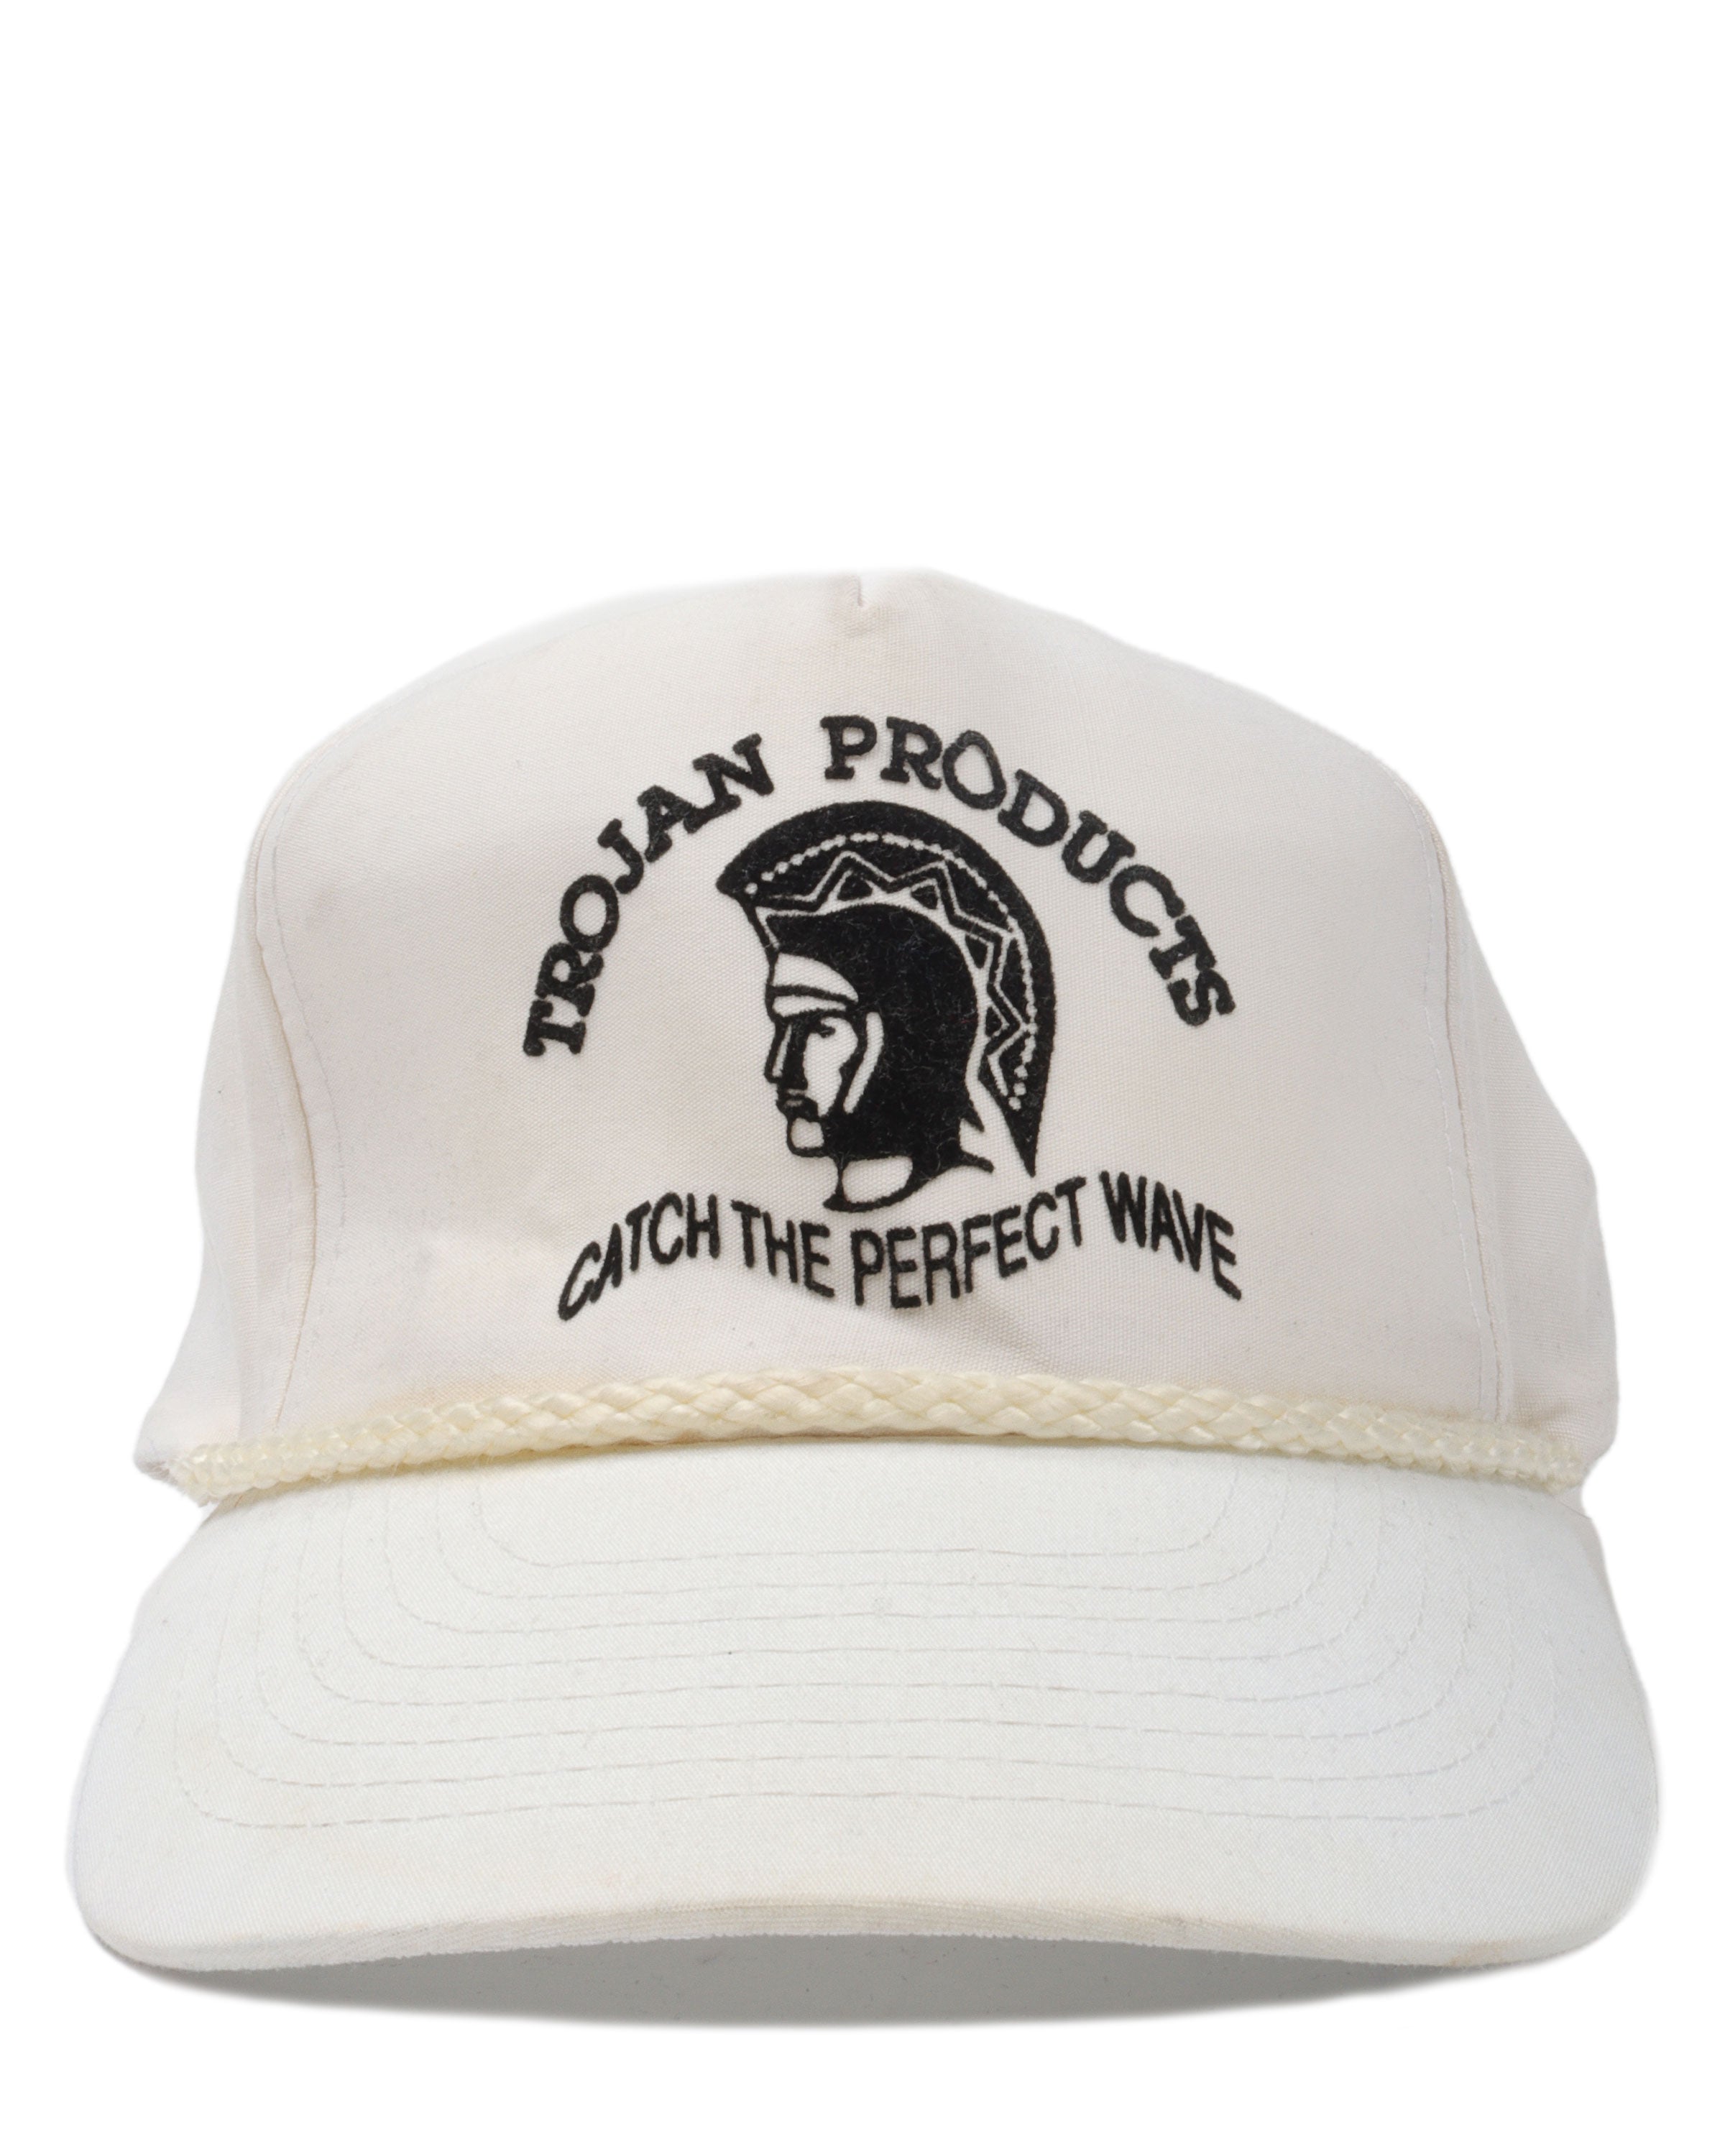 Trojan Products "Catch The Perfect Wave" Hat